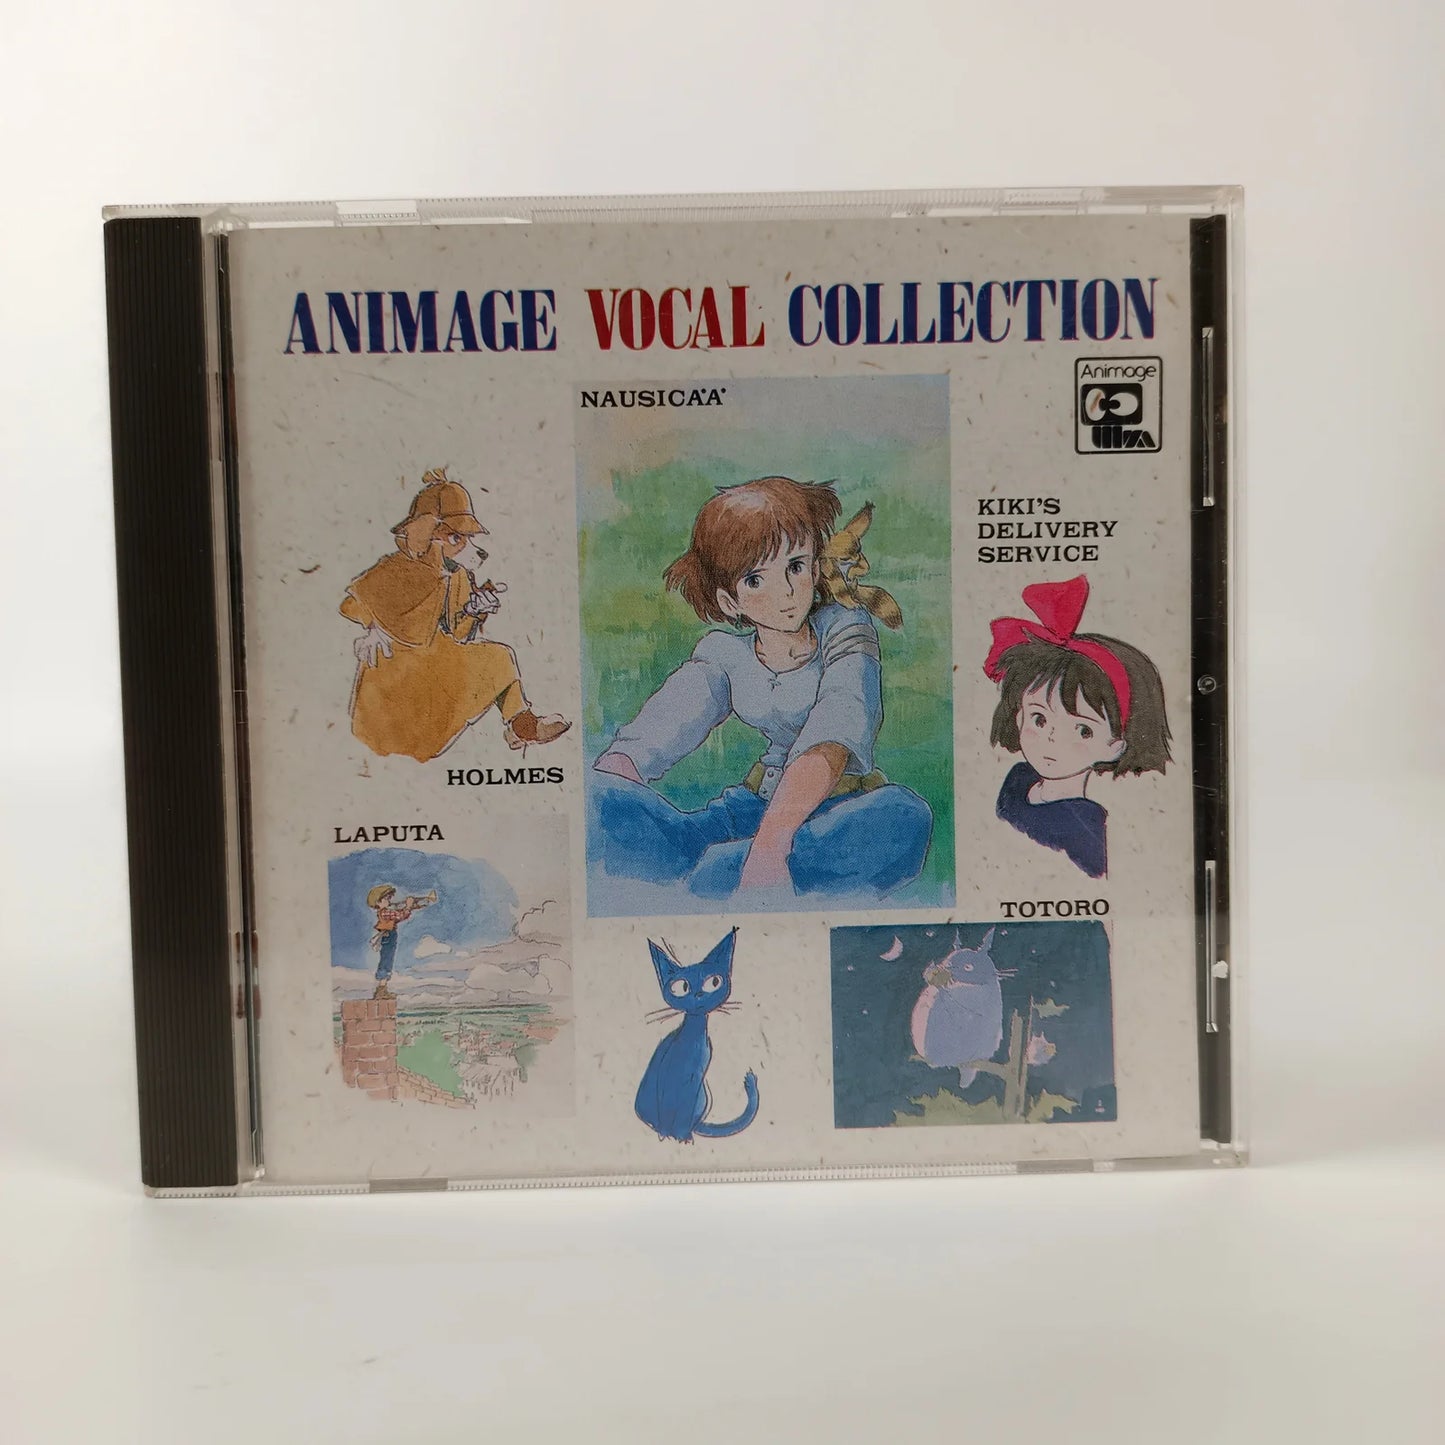 Animage Vocal Collection